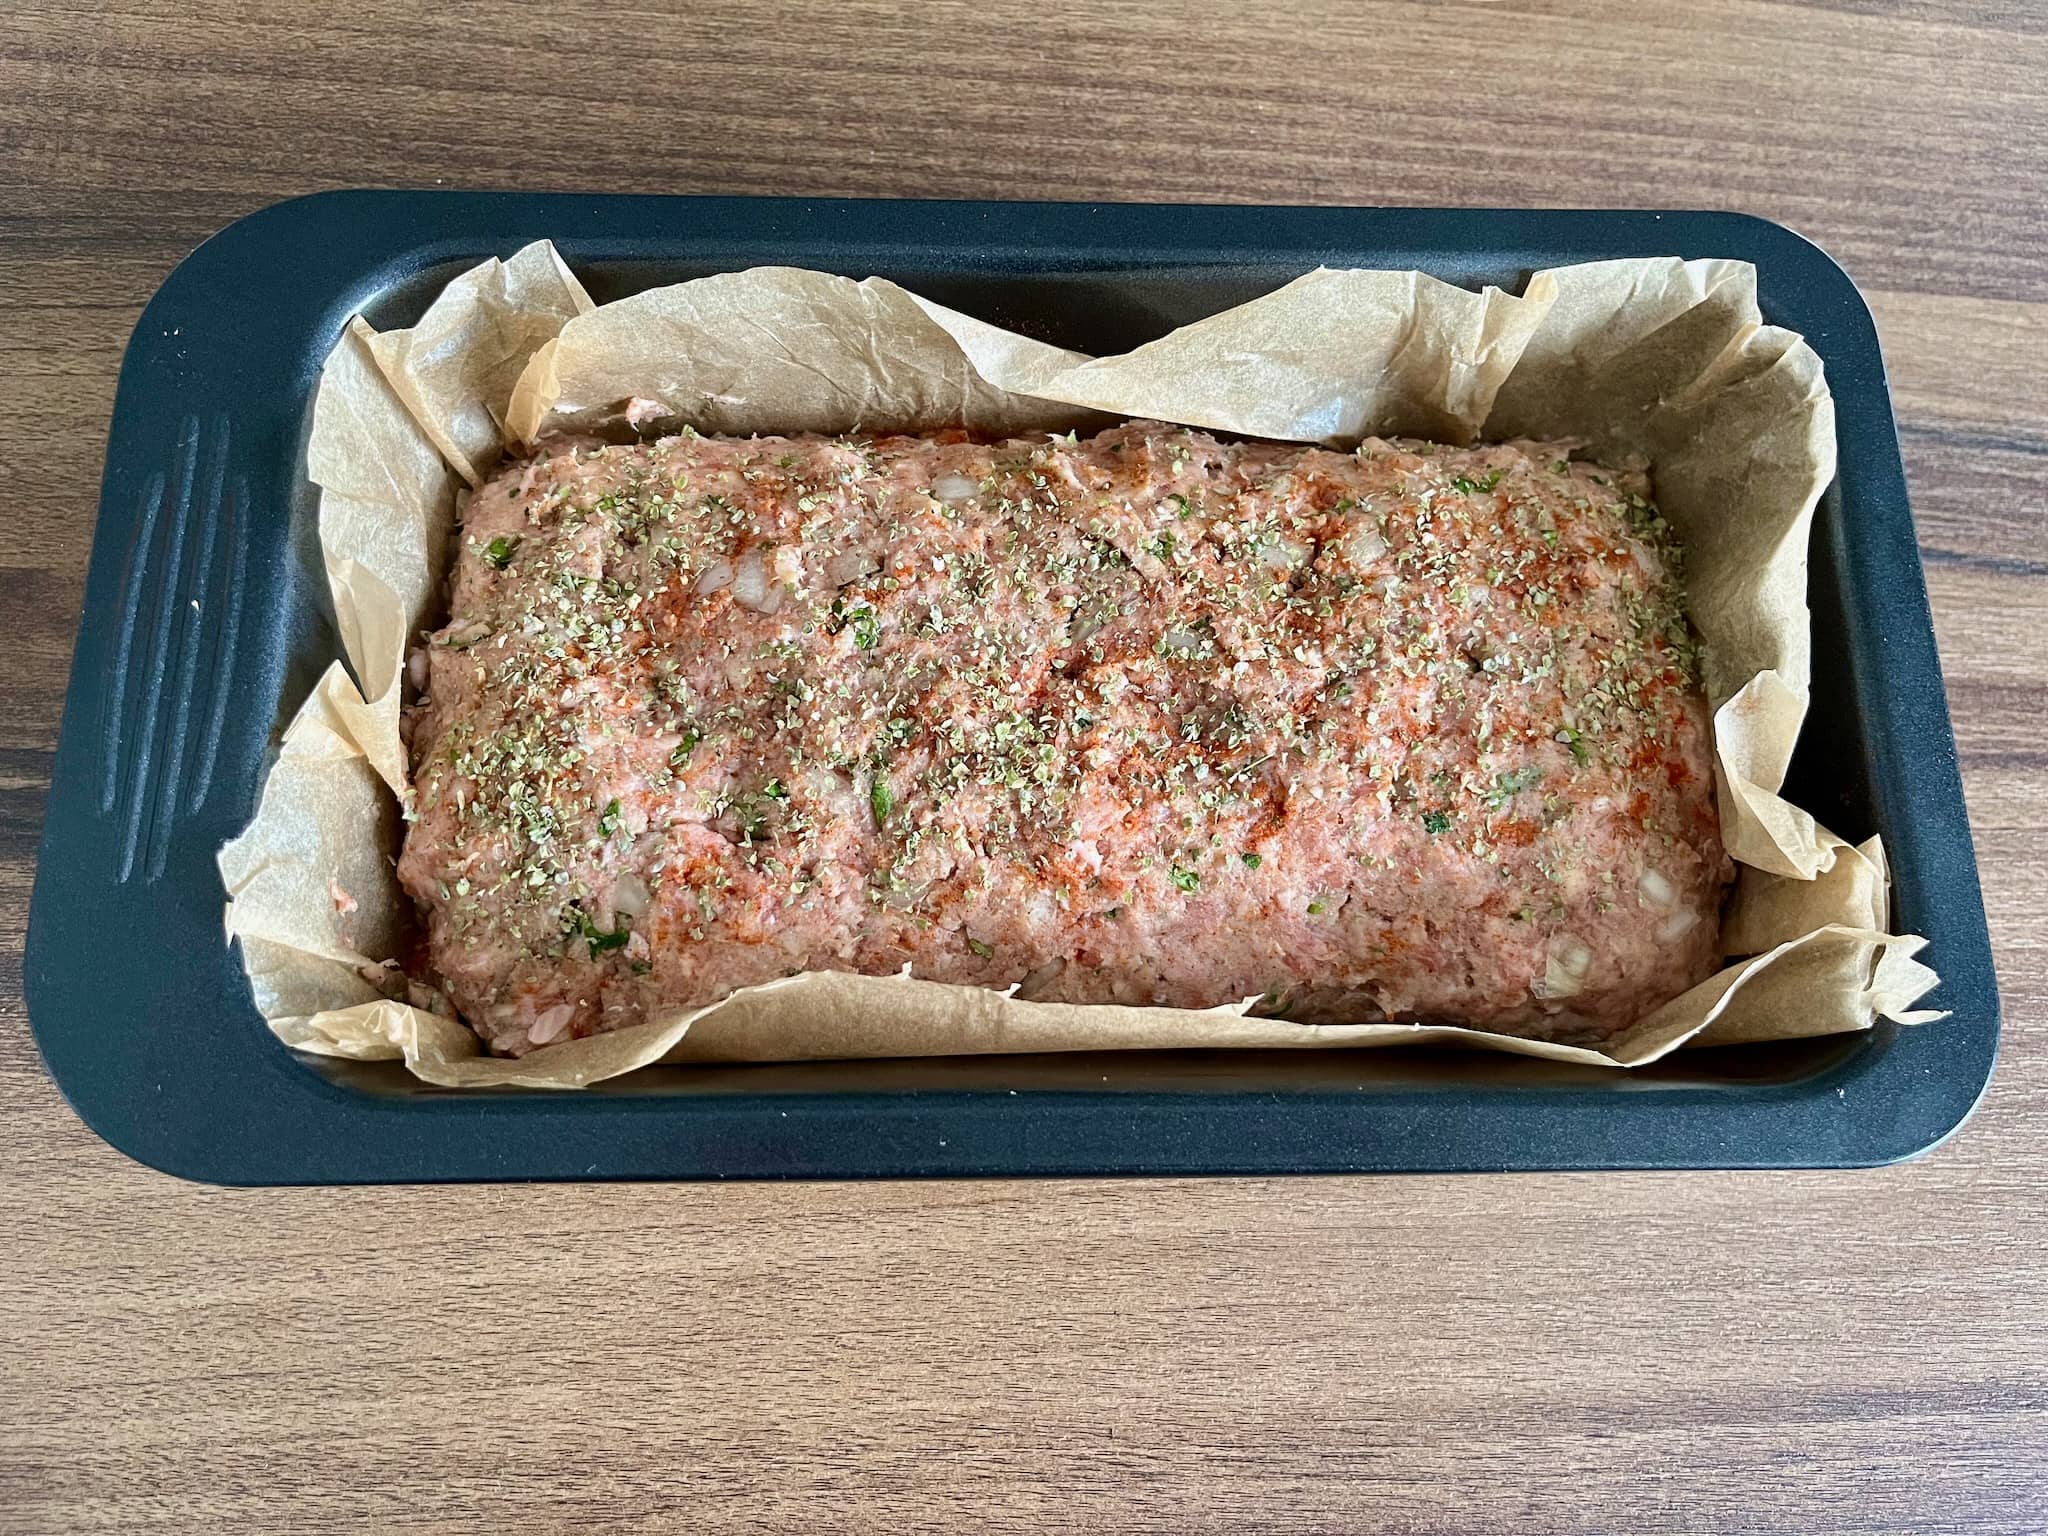 Meatloaf sprinkled with ground paprika and marjoram ready to be baked